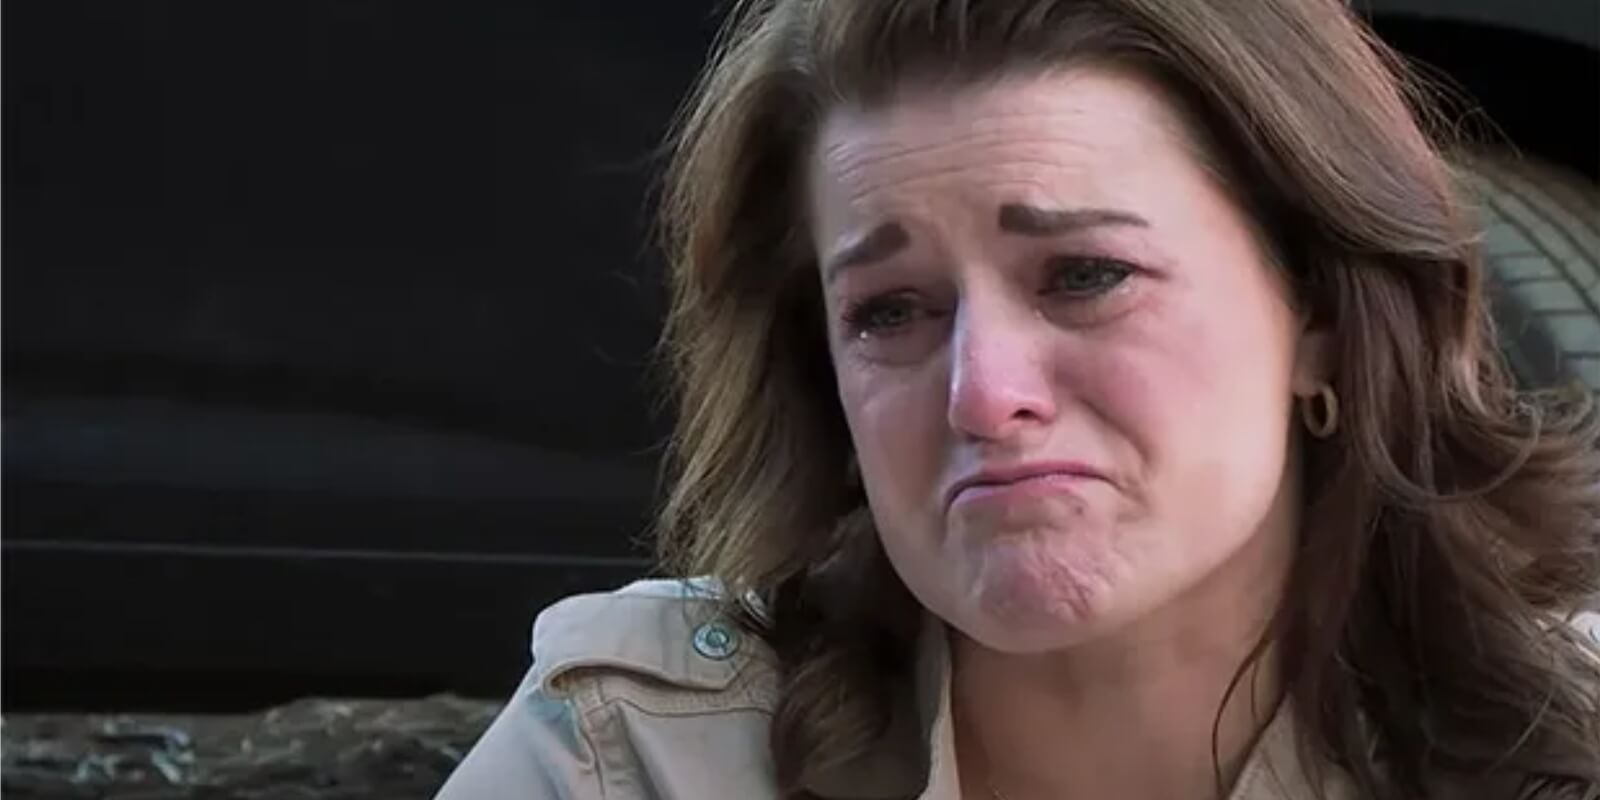 Robyn Brown cries during a trailer for season 18 of TLC's 'Sister Wives.'